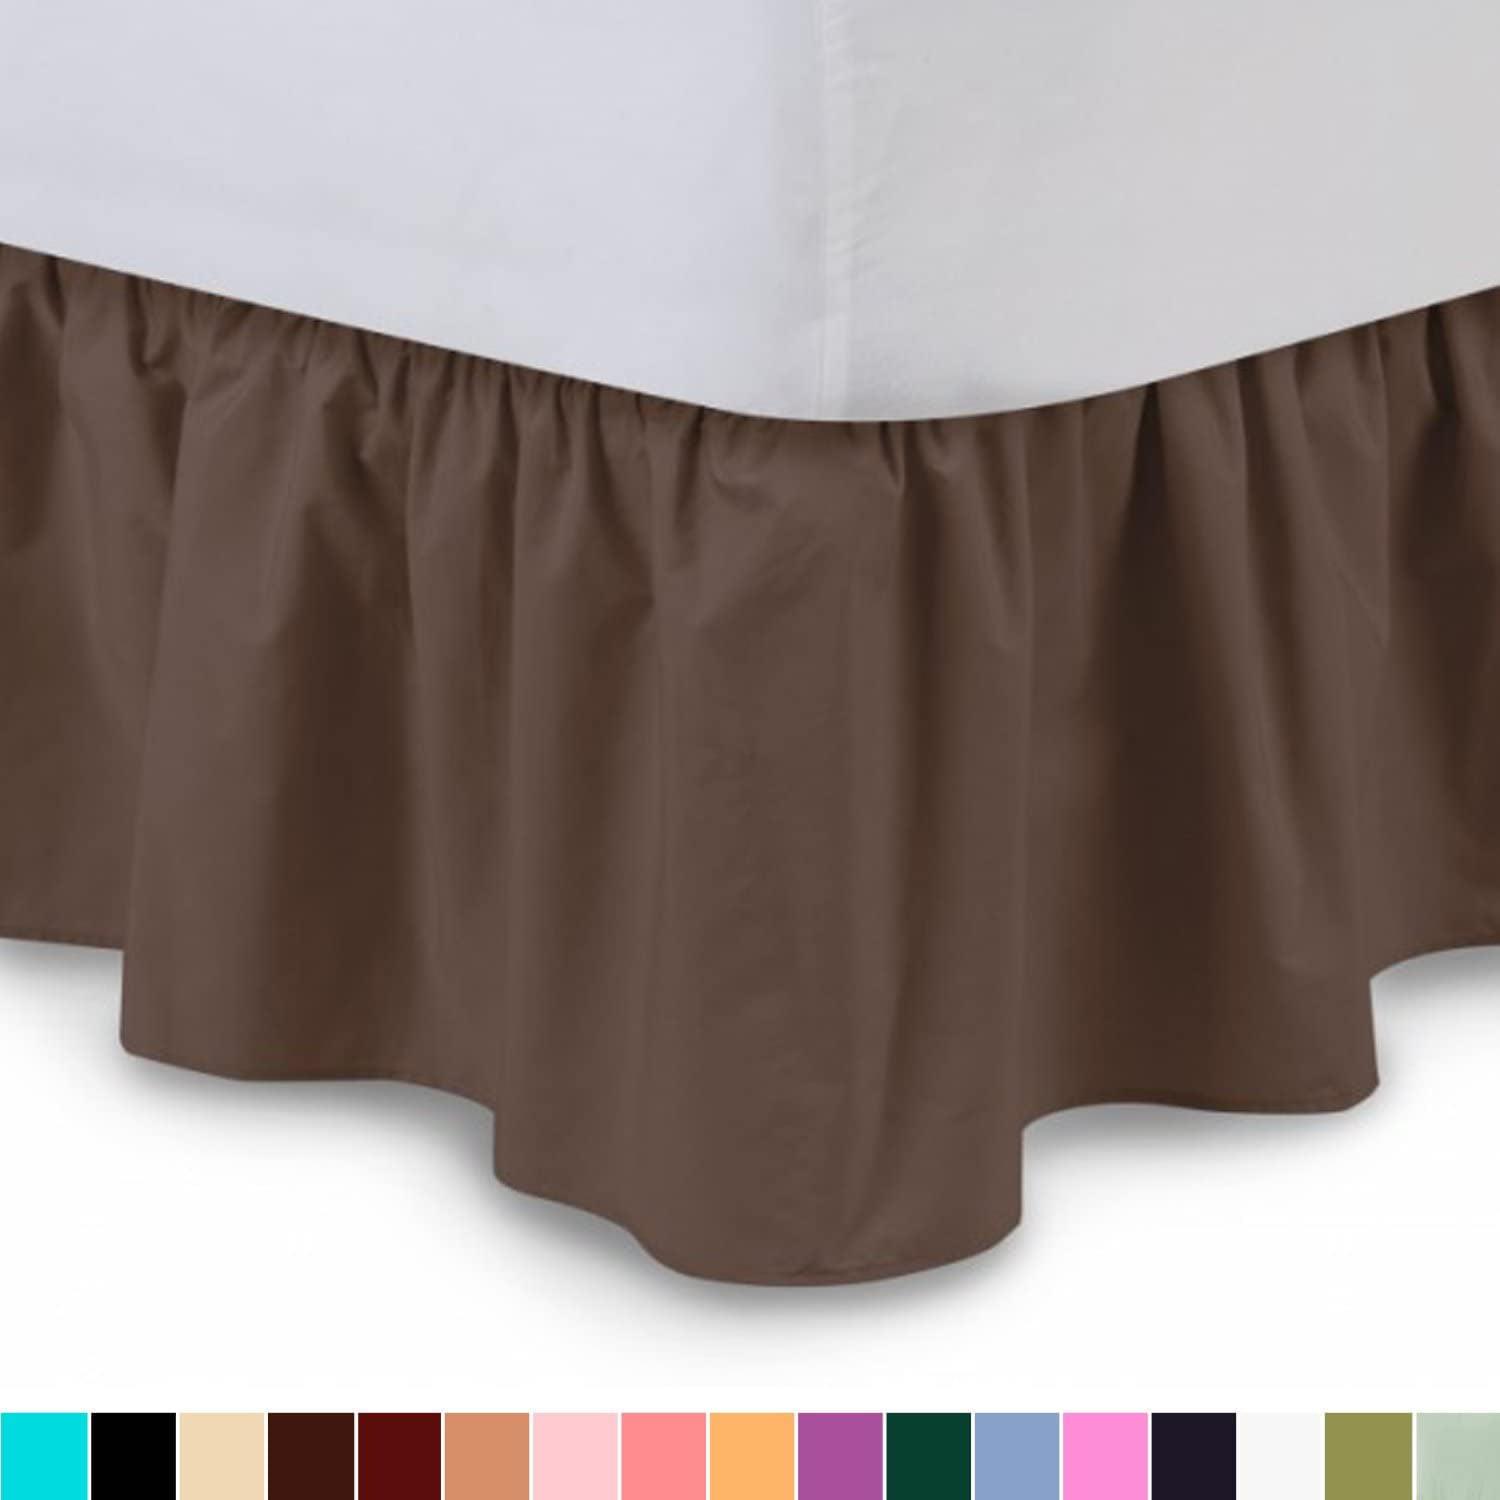 Ruffled Bedskirt (Twin XL, Brown) 18 Inch Bed Skirt with ...